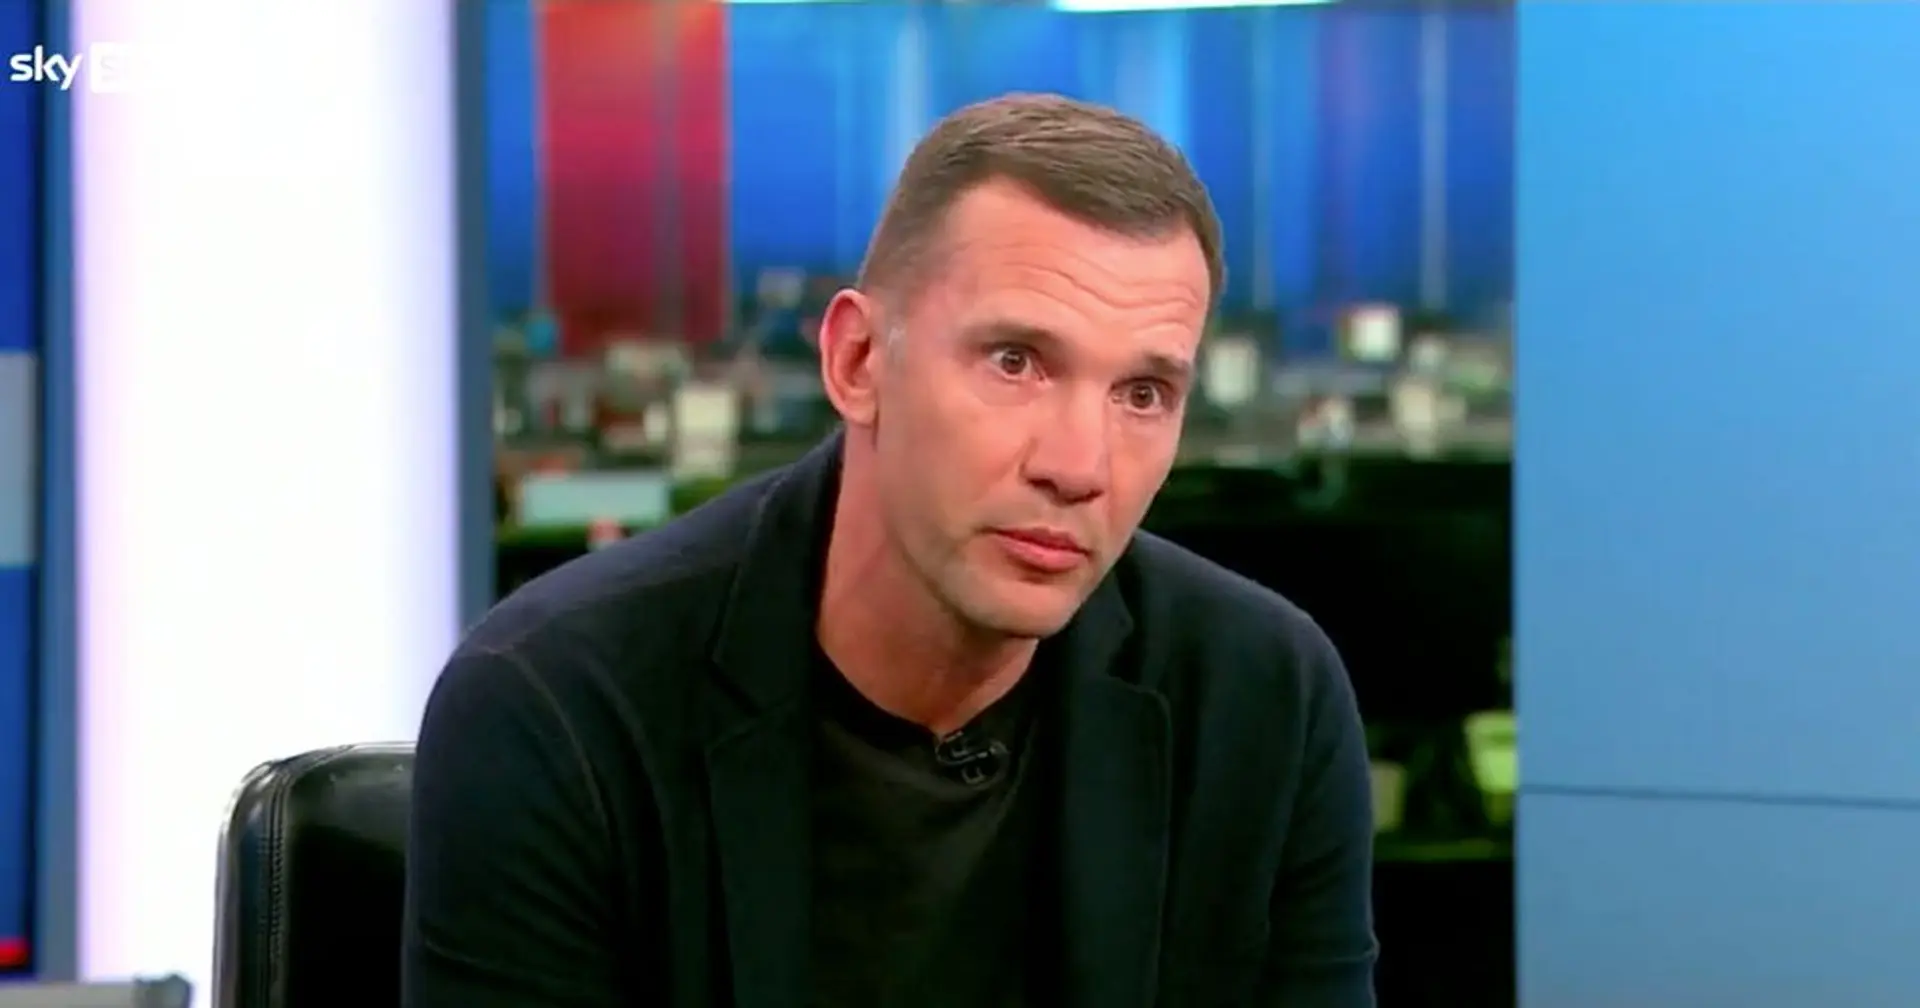 Andriy Shevchenko: 'I want only one thing: to bring the peace in my country, to stop the killing of kids'